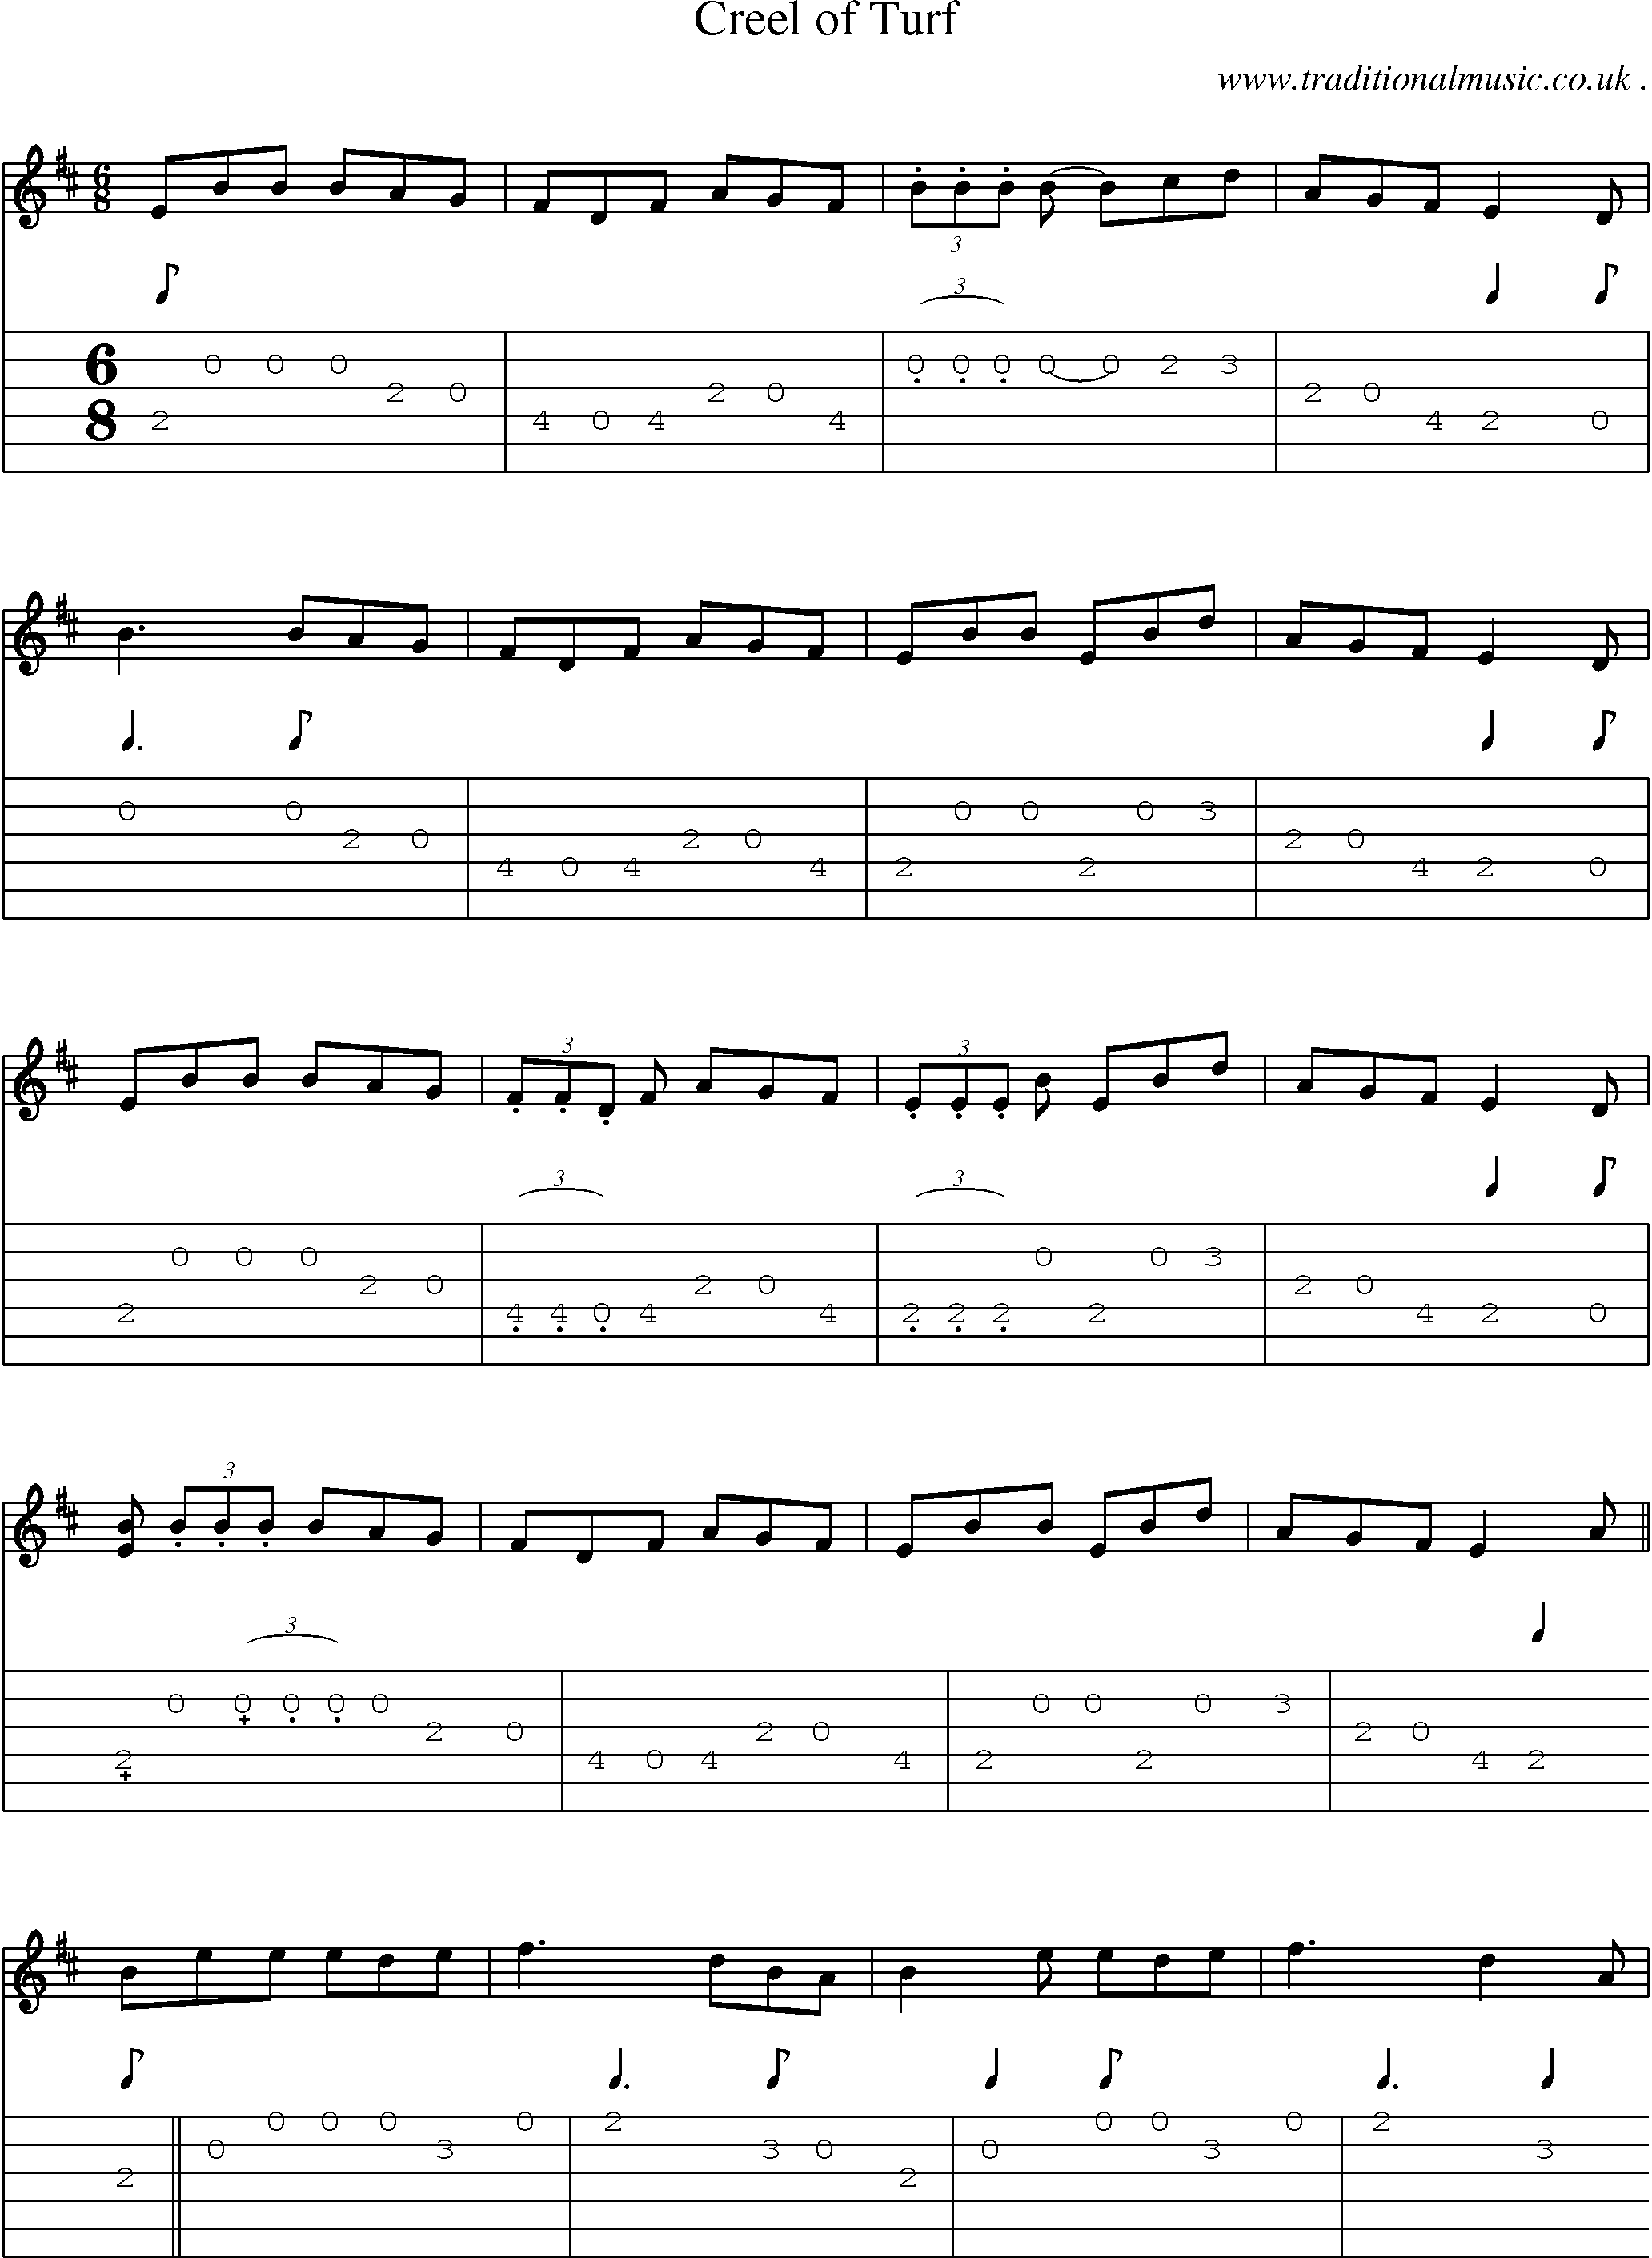 Sheet-Music and Guitar Tabs for Creel Of Turf